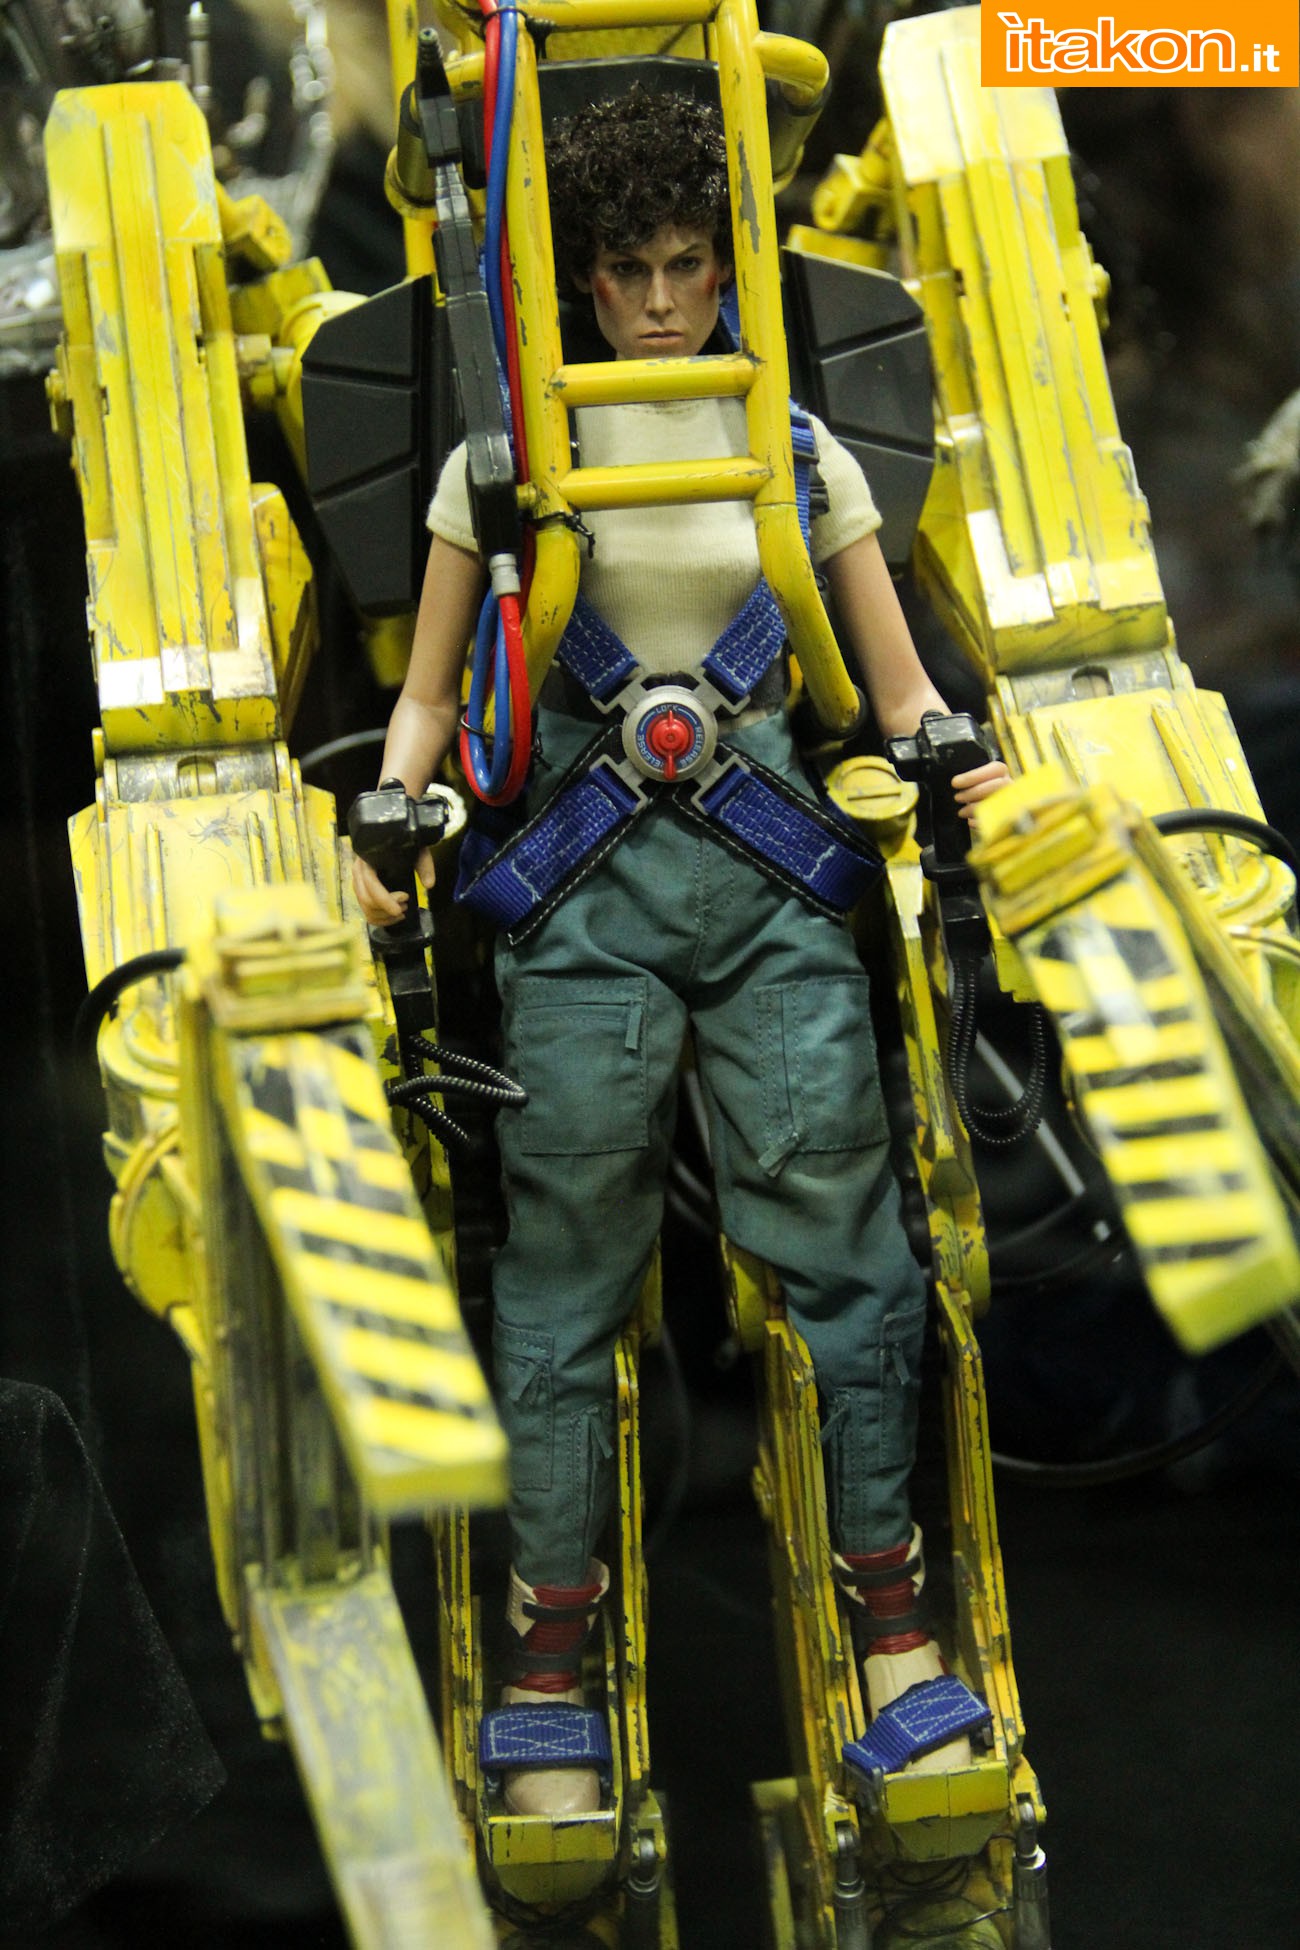 sdcc2014-hot-toys-booth-47.jpg